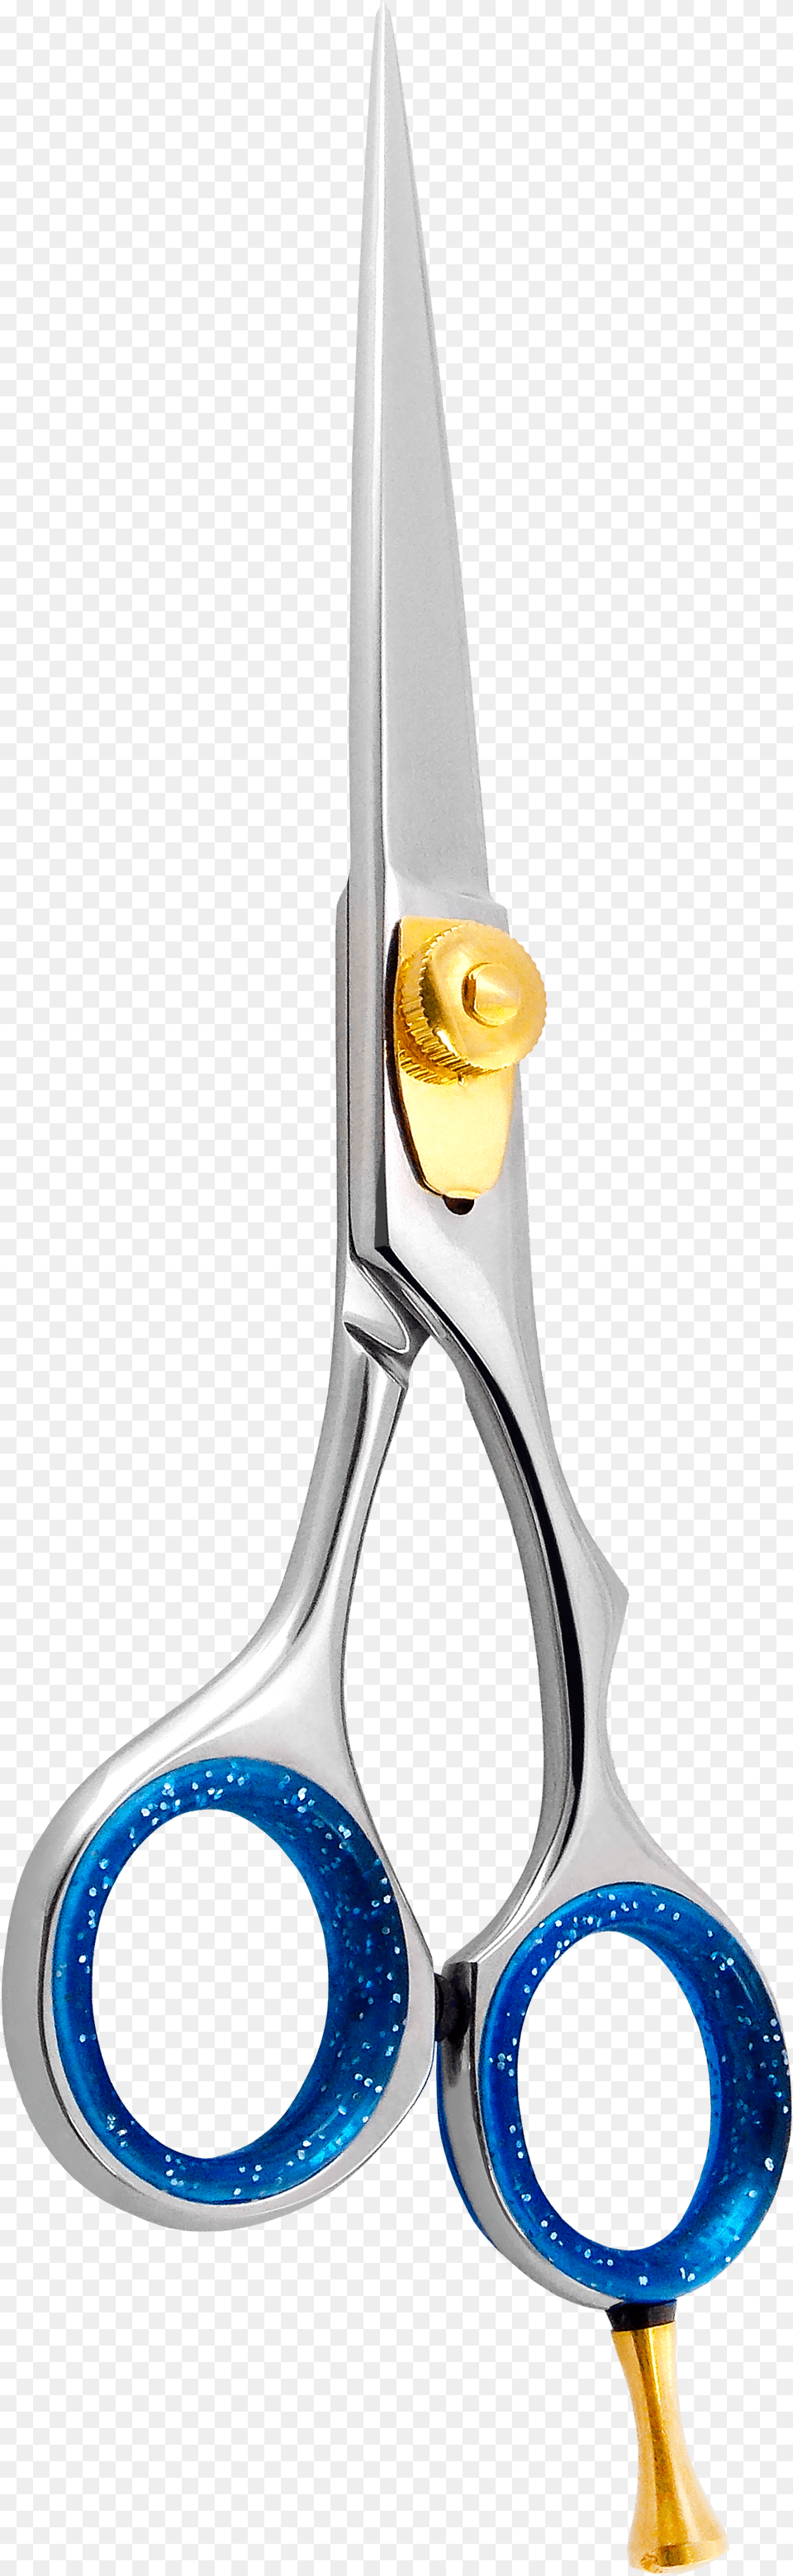 Scissors, Blade, Shears, Weapon Png Image